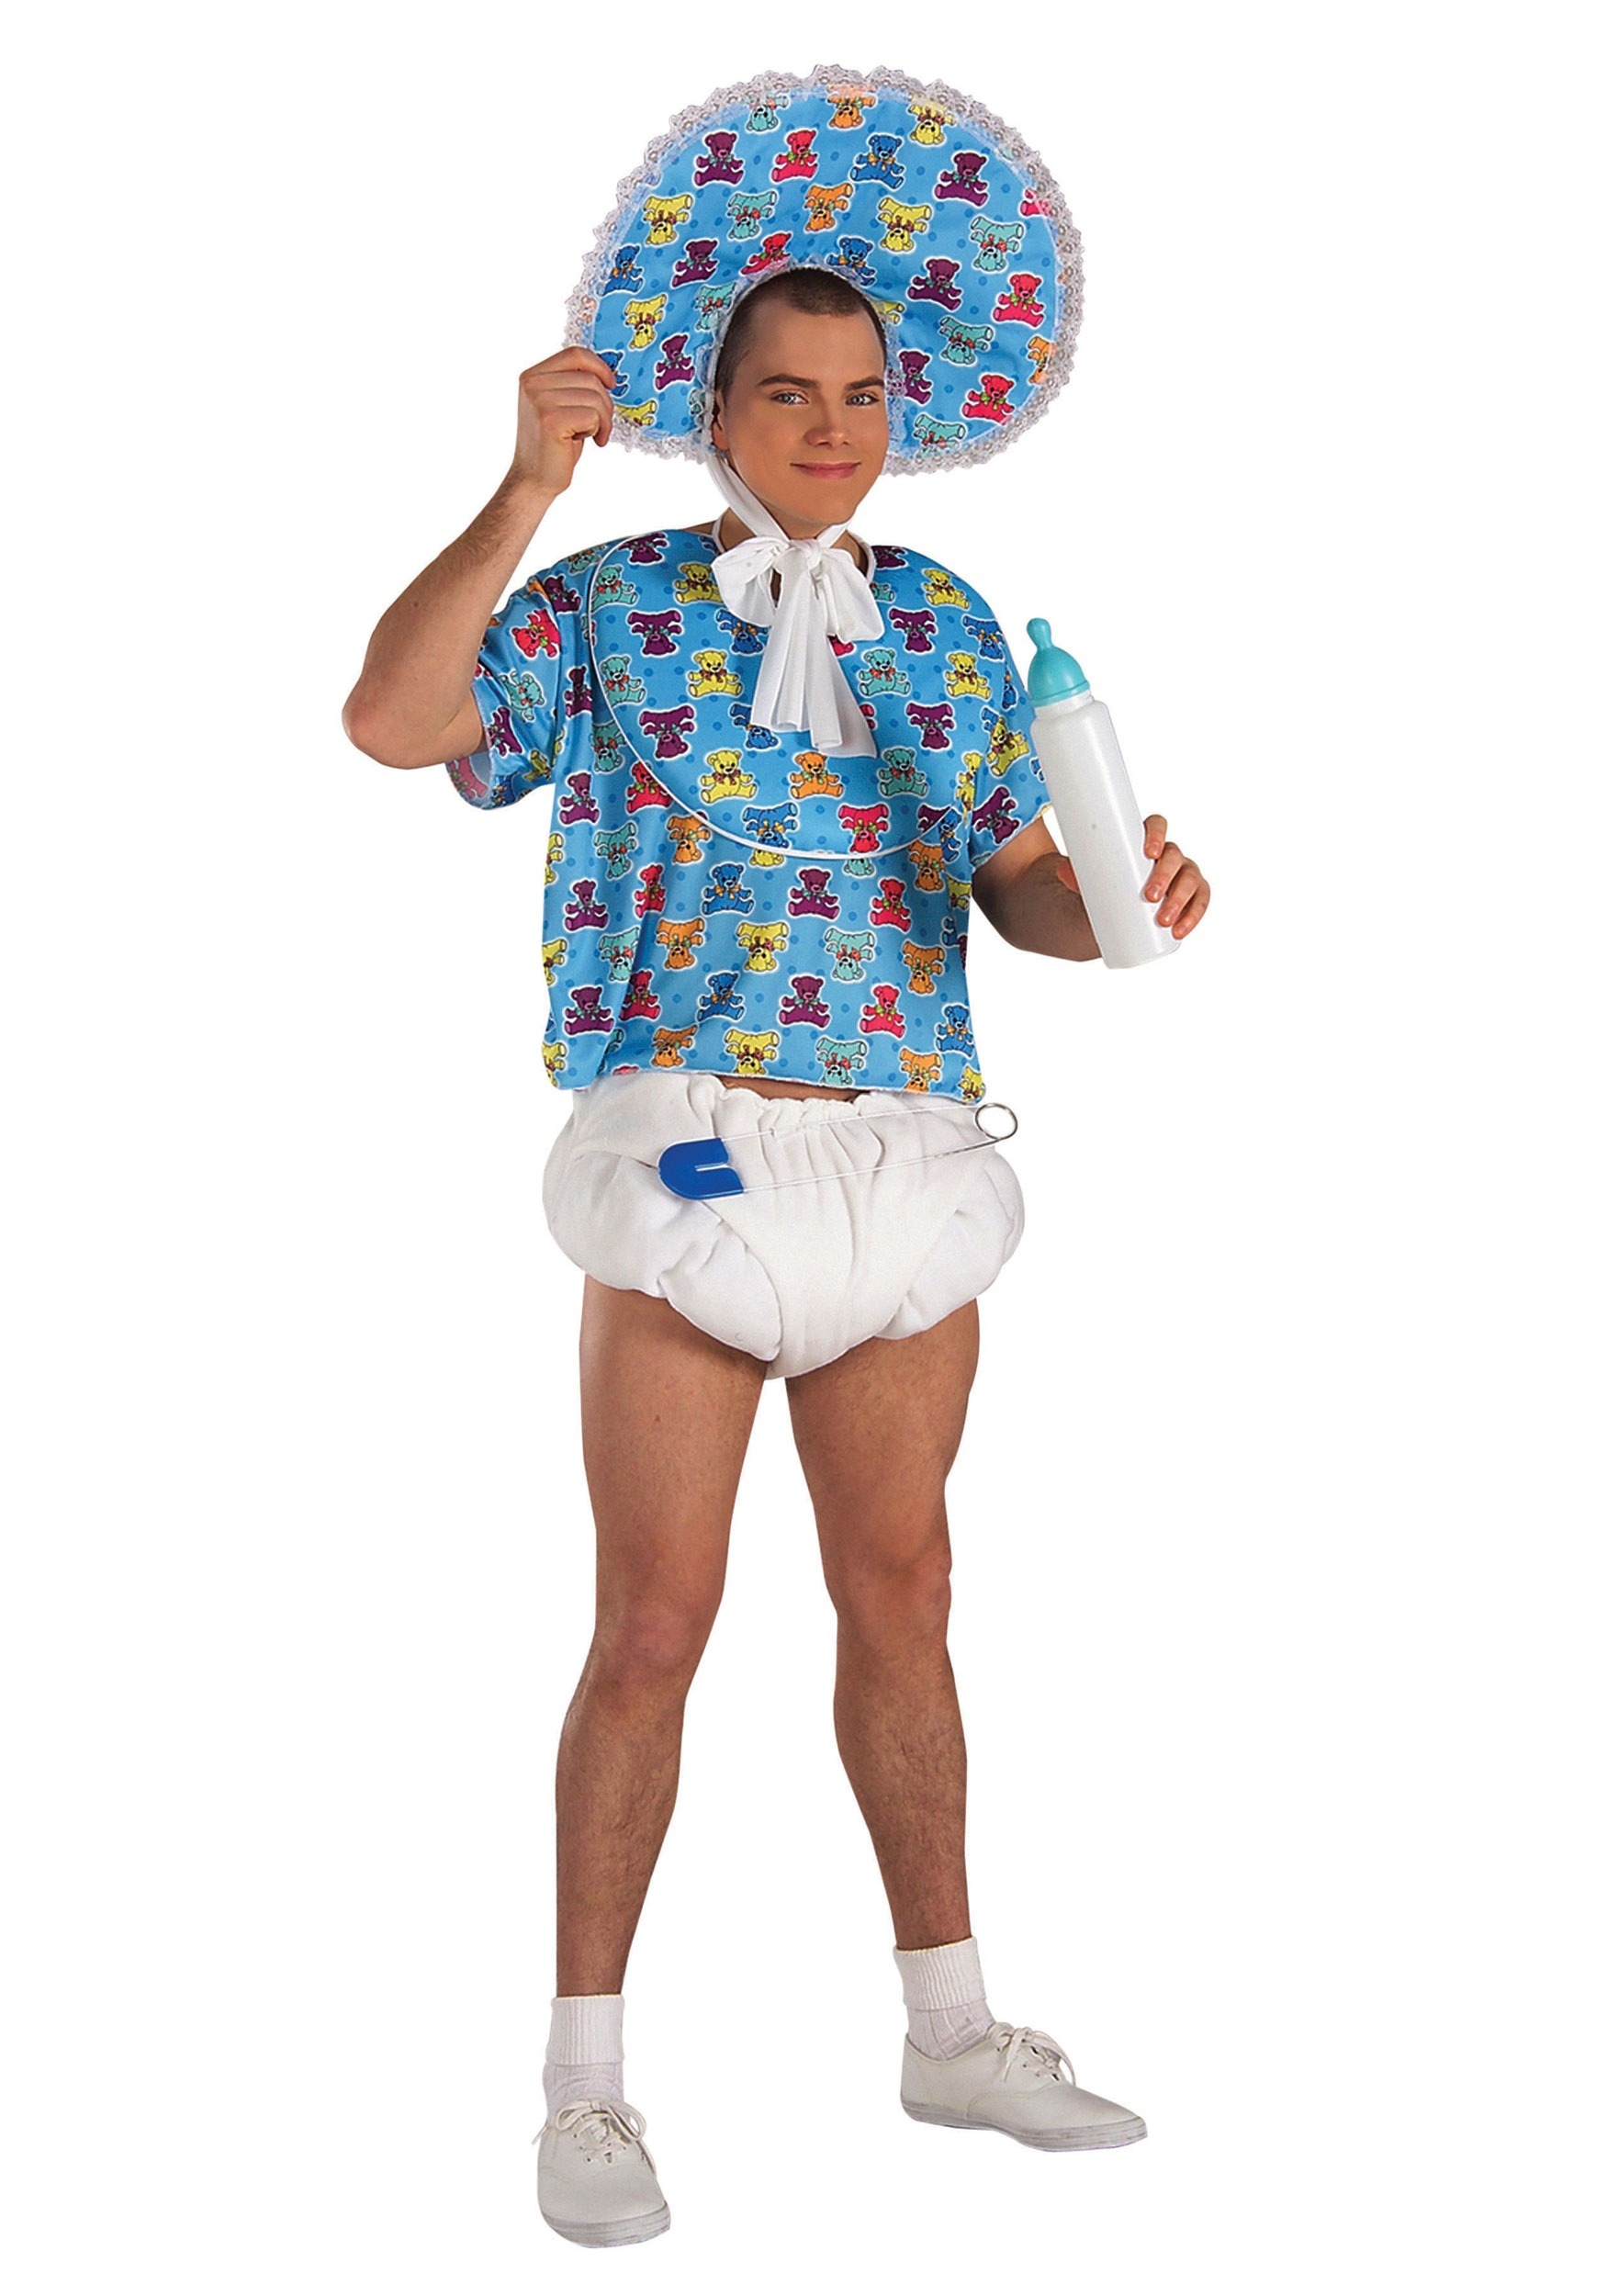 https://images.halloweencostumes.com/products/45559/1-1/blue-adult-baby-kit.jpg